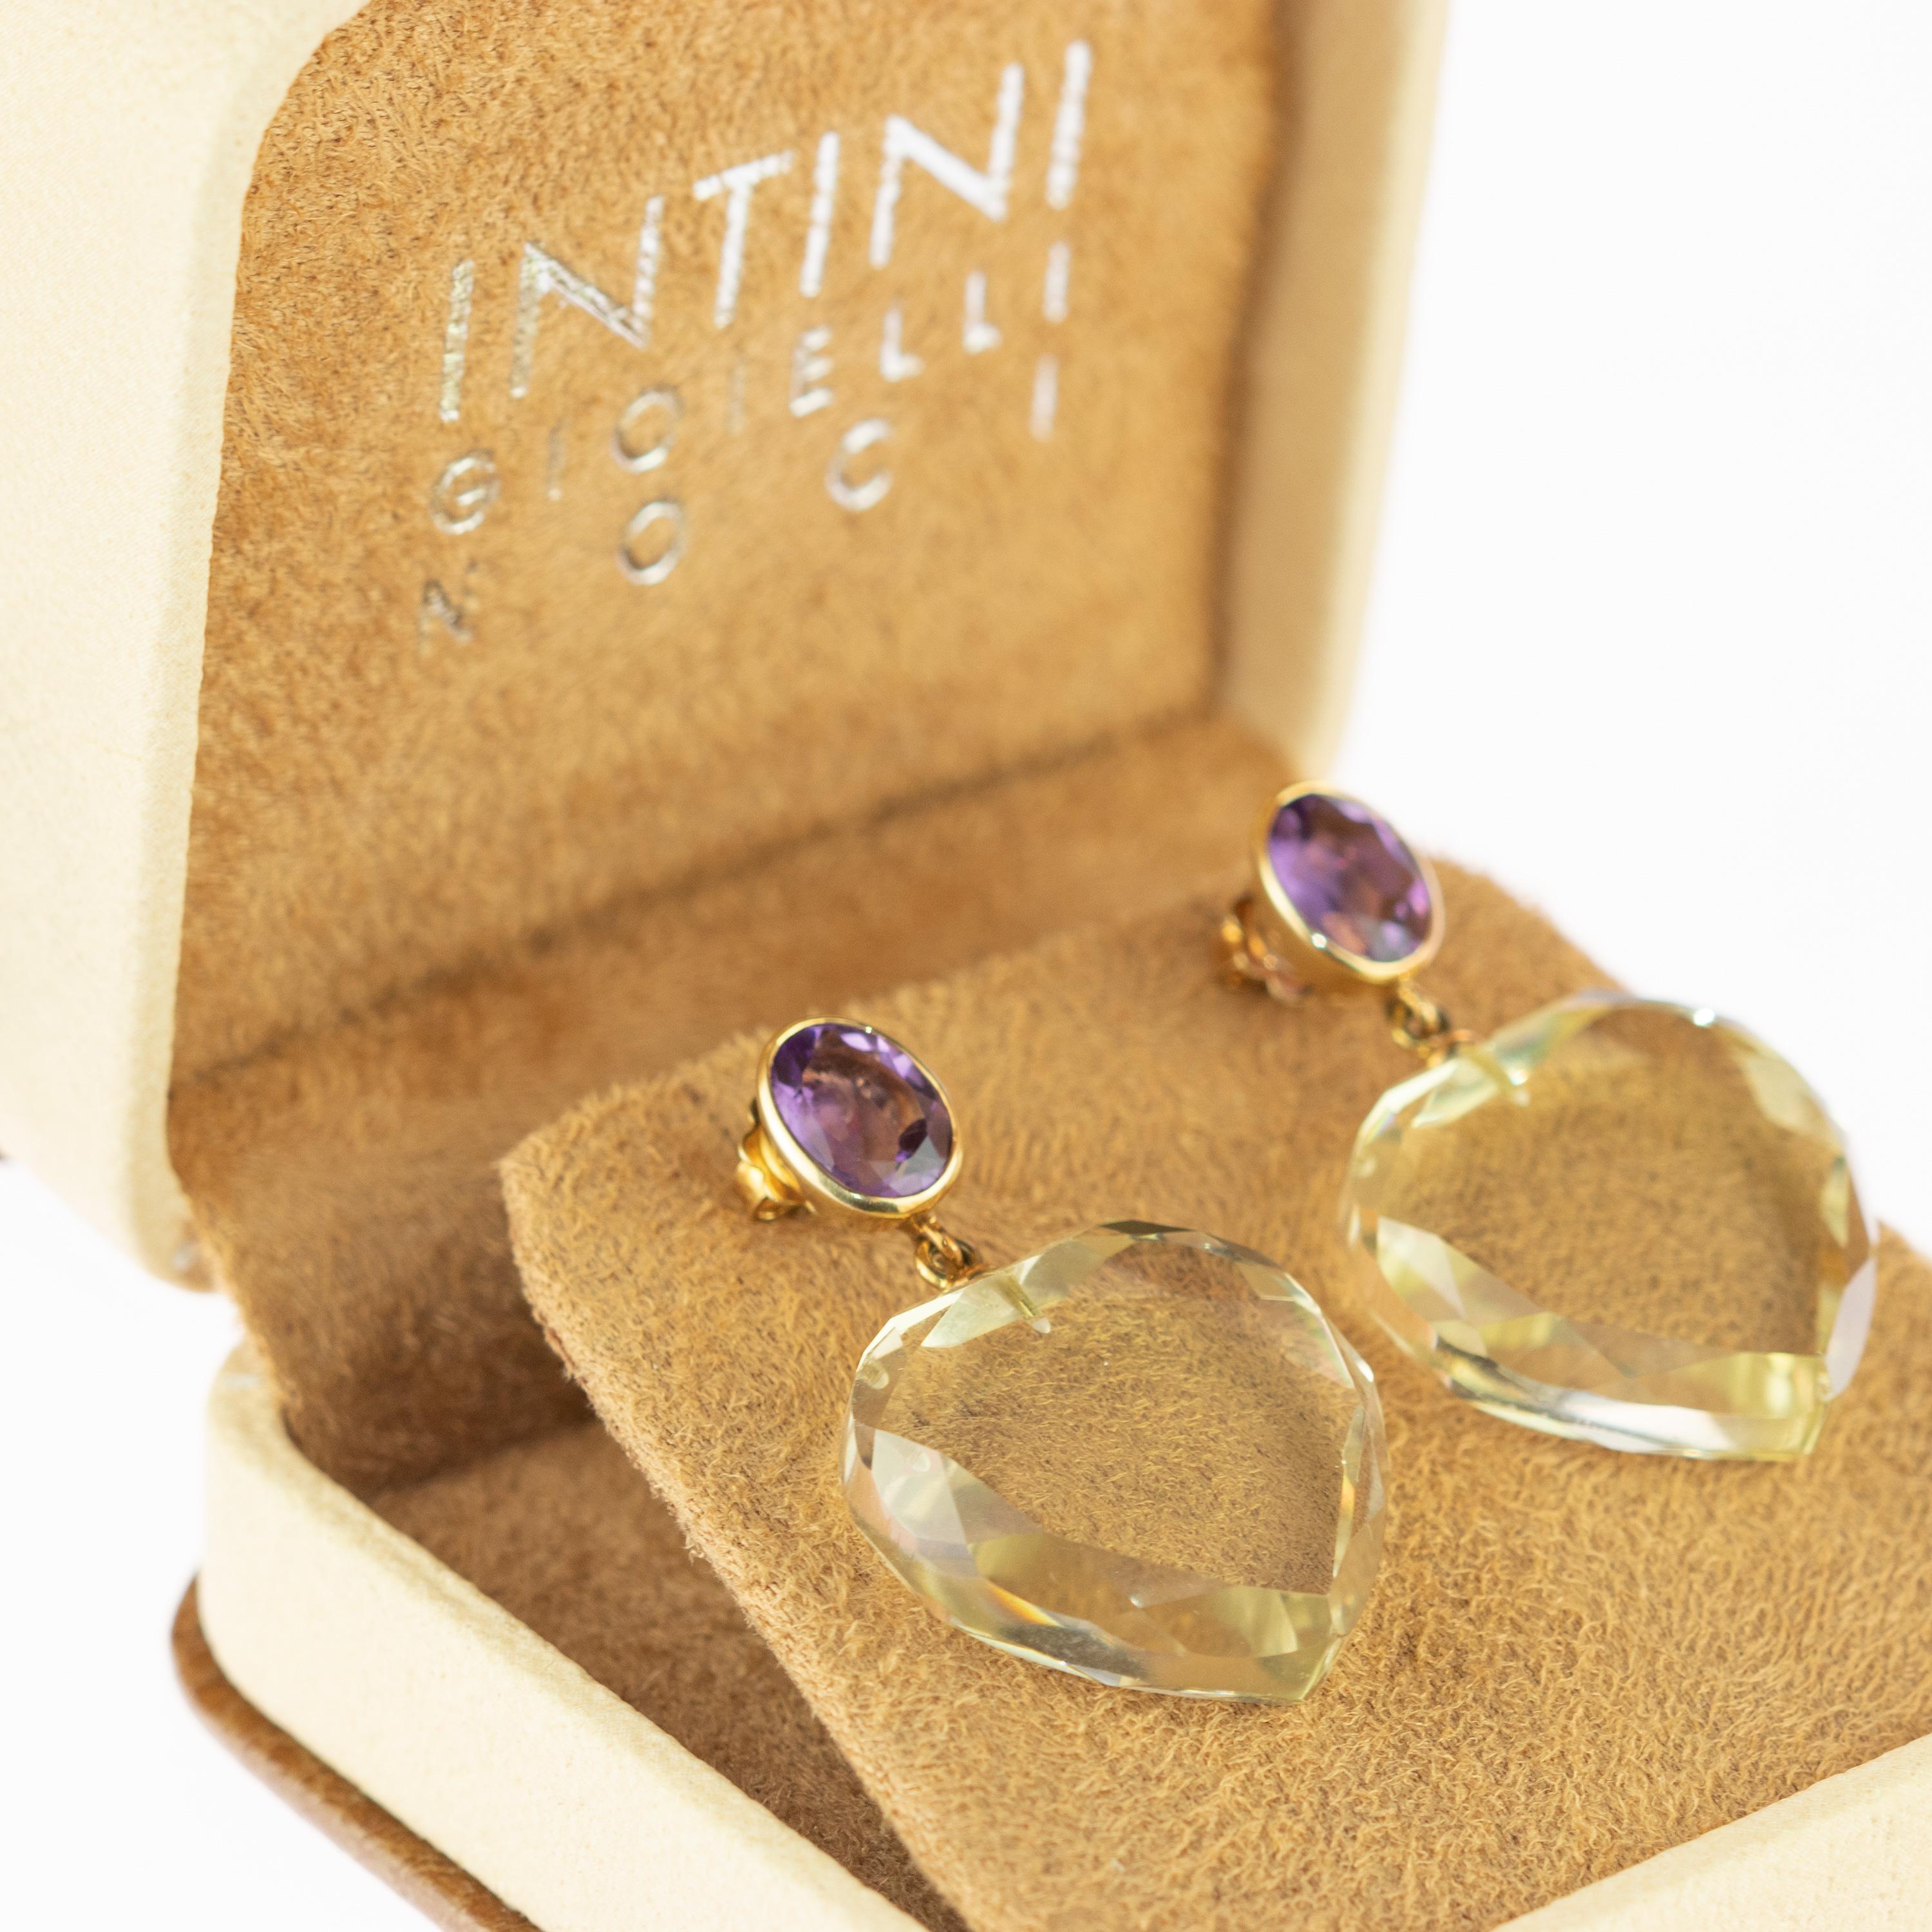 Take love with you everywhere! These breathtaking earrings have a sweet design and the most precious stones.  The amethyst activates spiritual awareness, opens intuition and enhances your senses to find love. The crystal rock encourages emotional